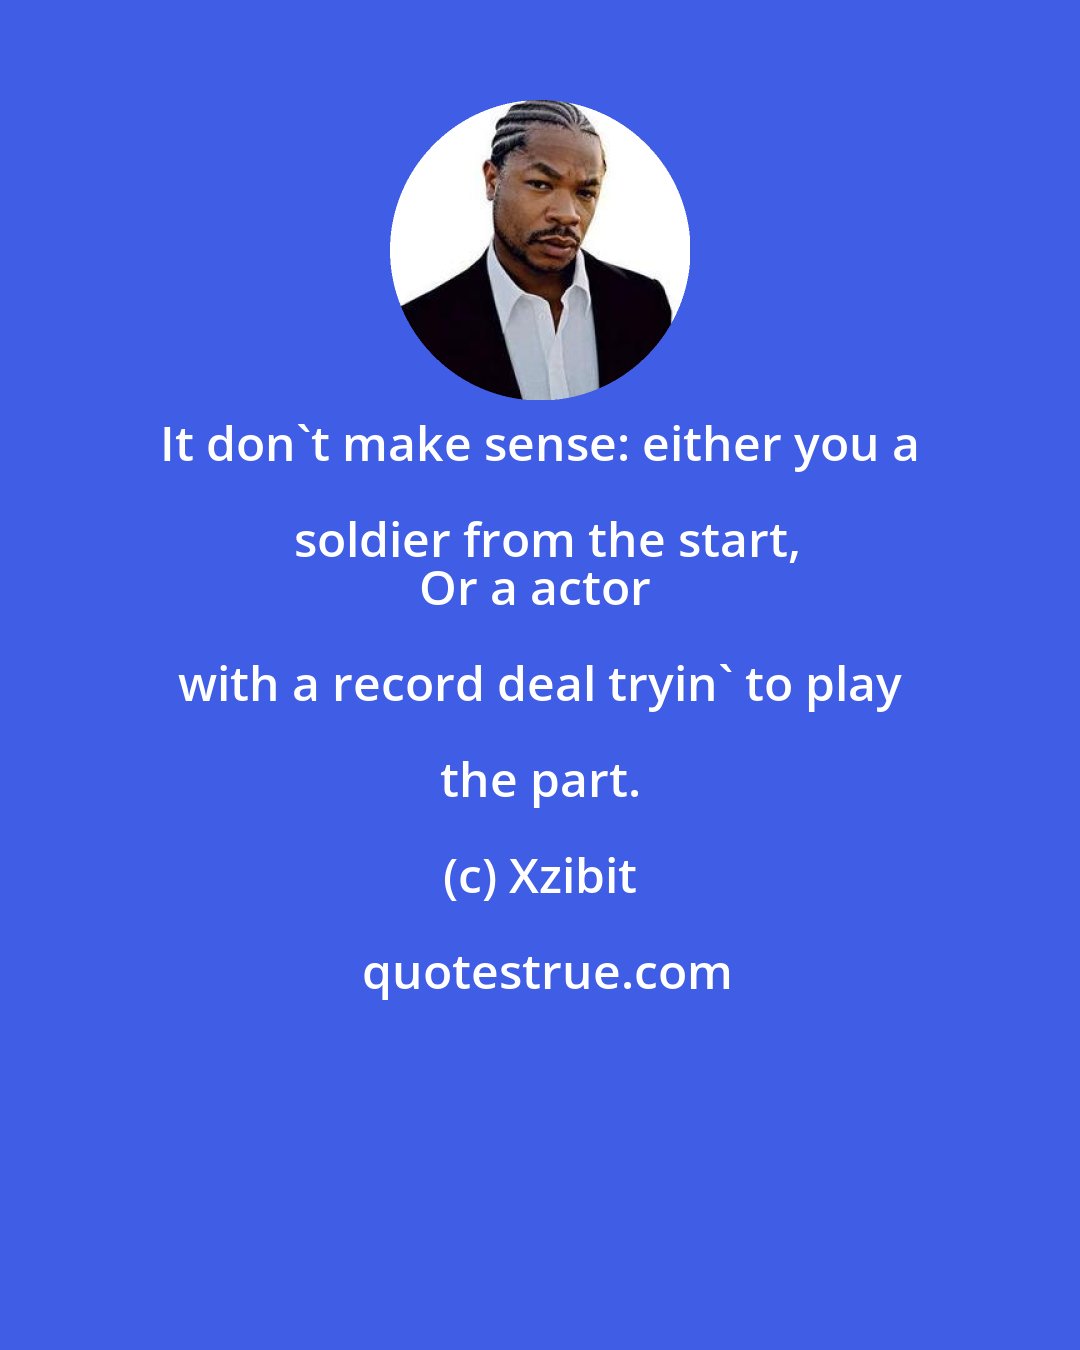 Xzibit: It don't make sense: either you a soldier from the start,
Or a actor with a record deal tryin' to play the part.